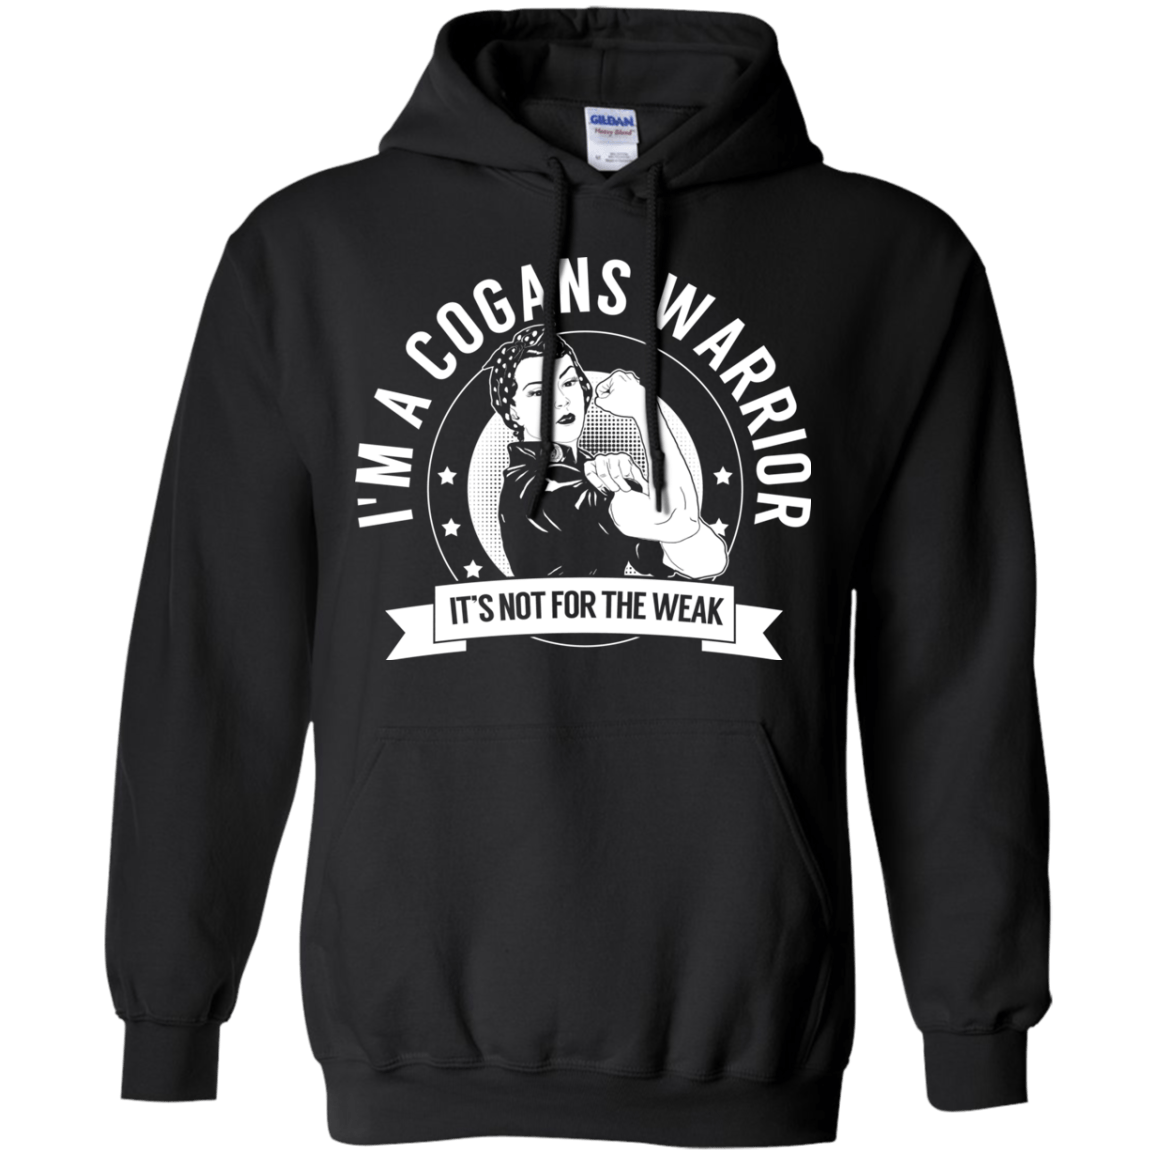 Cogans Warrior Not For The Weak Pullover Hoodie 8 oz. - The Unchargeables